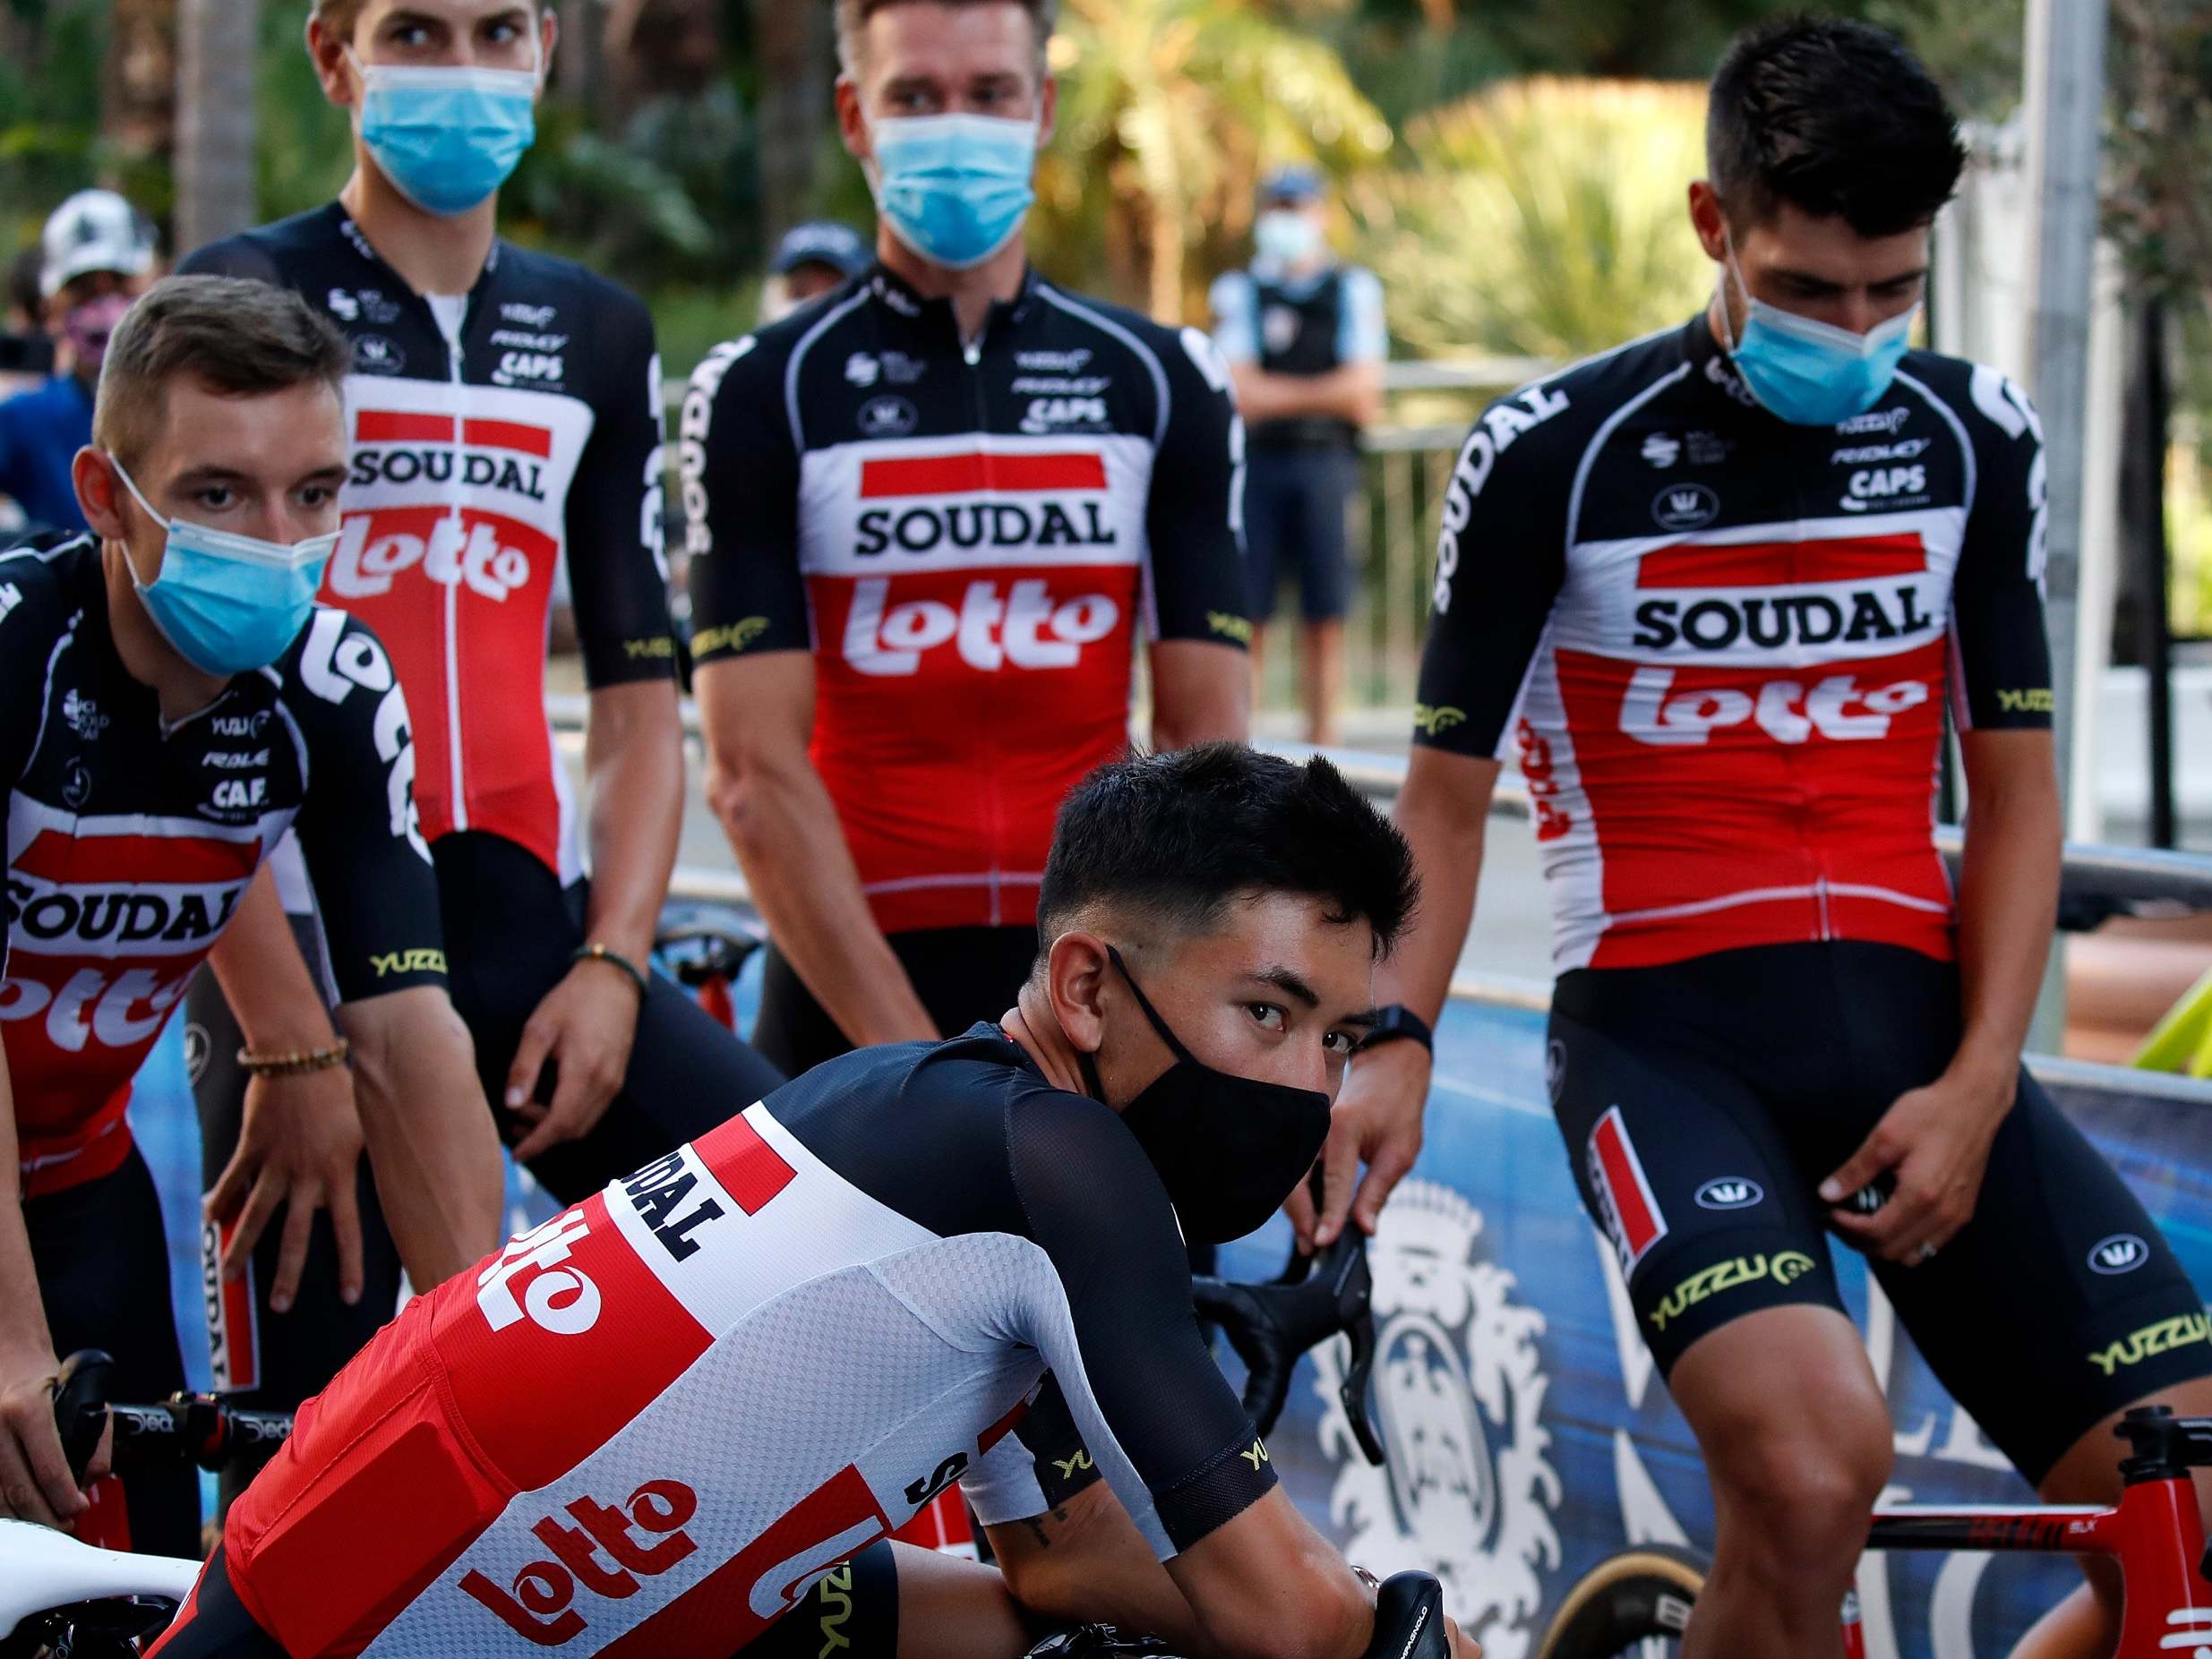 Four staff members of Team Lotto-Soudal were sent home following 'non-negative' test results